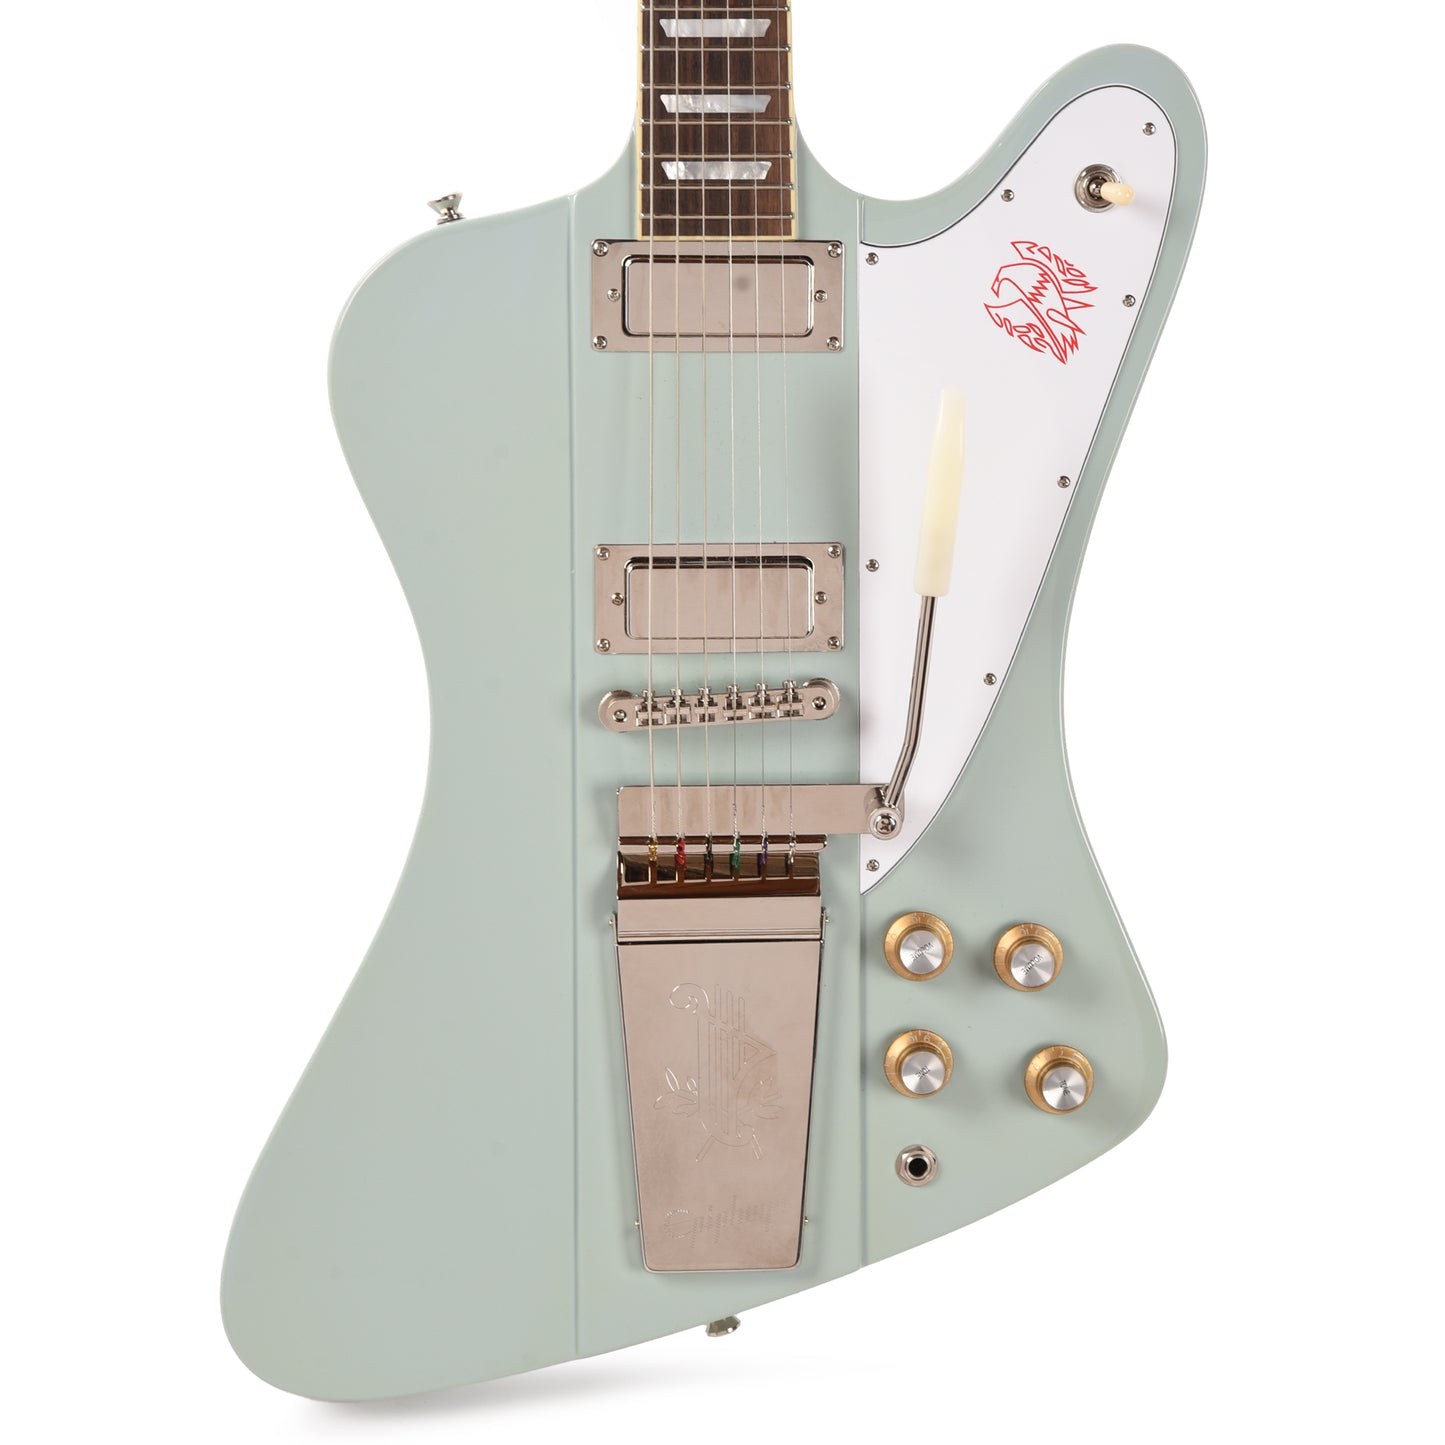 Epiphone Inspired by Gibson 1963 Firebird V Frost Blue